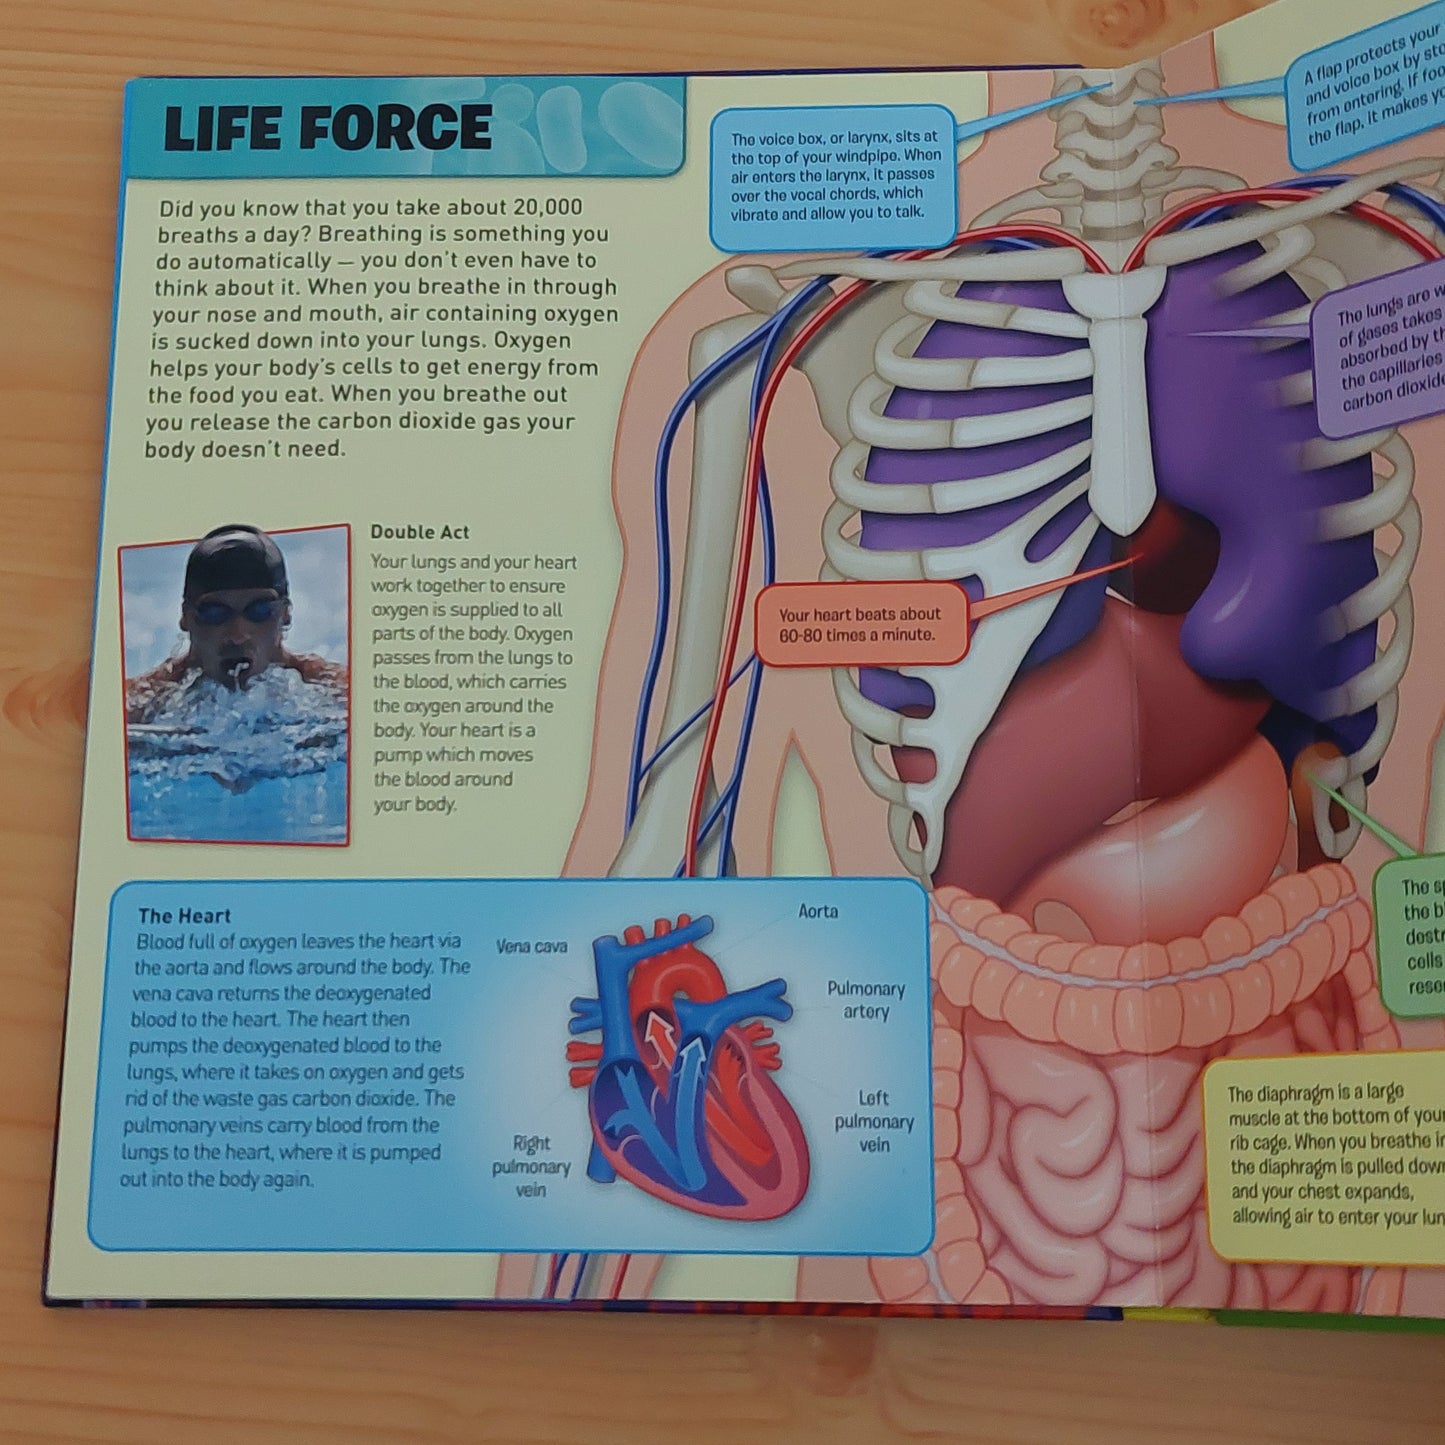 The Incredible Human Body in a Book